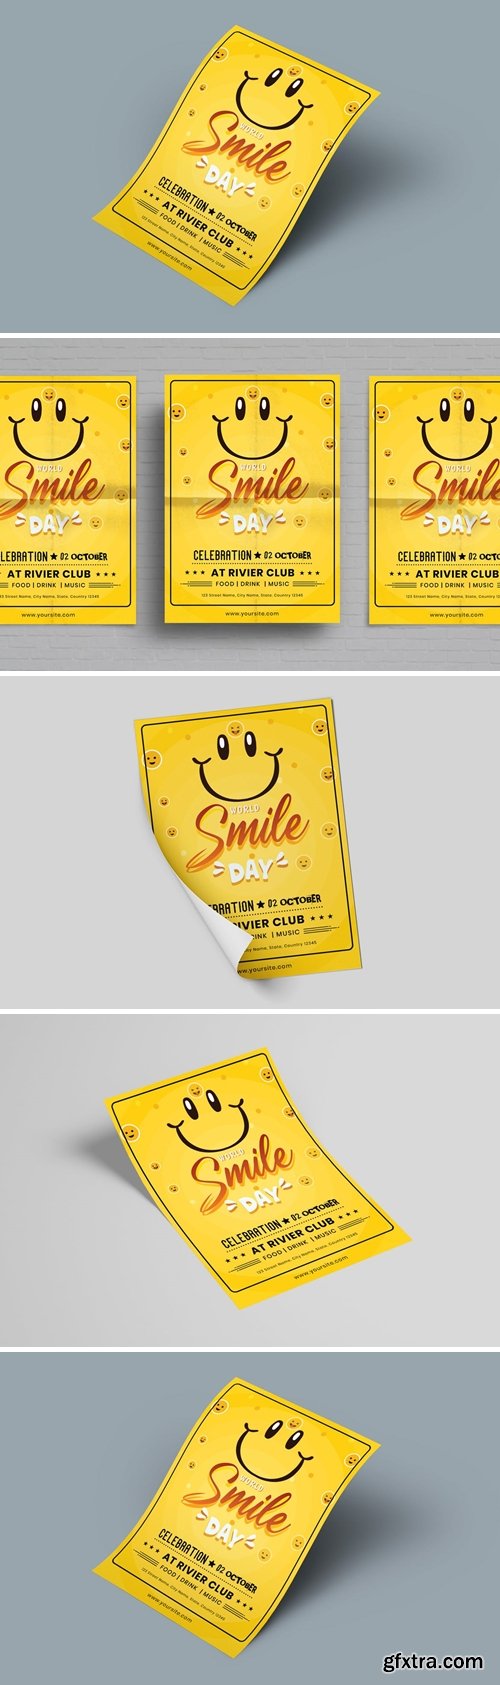 World Smile Day Flyer Template